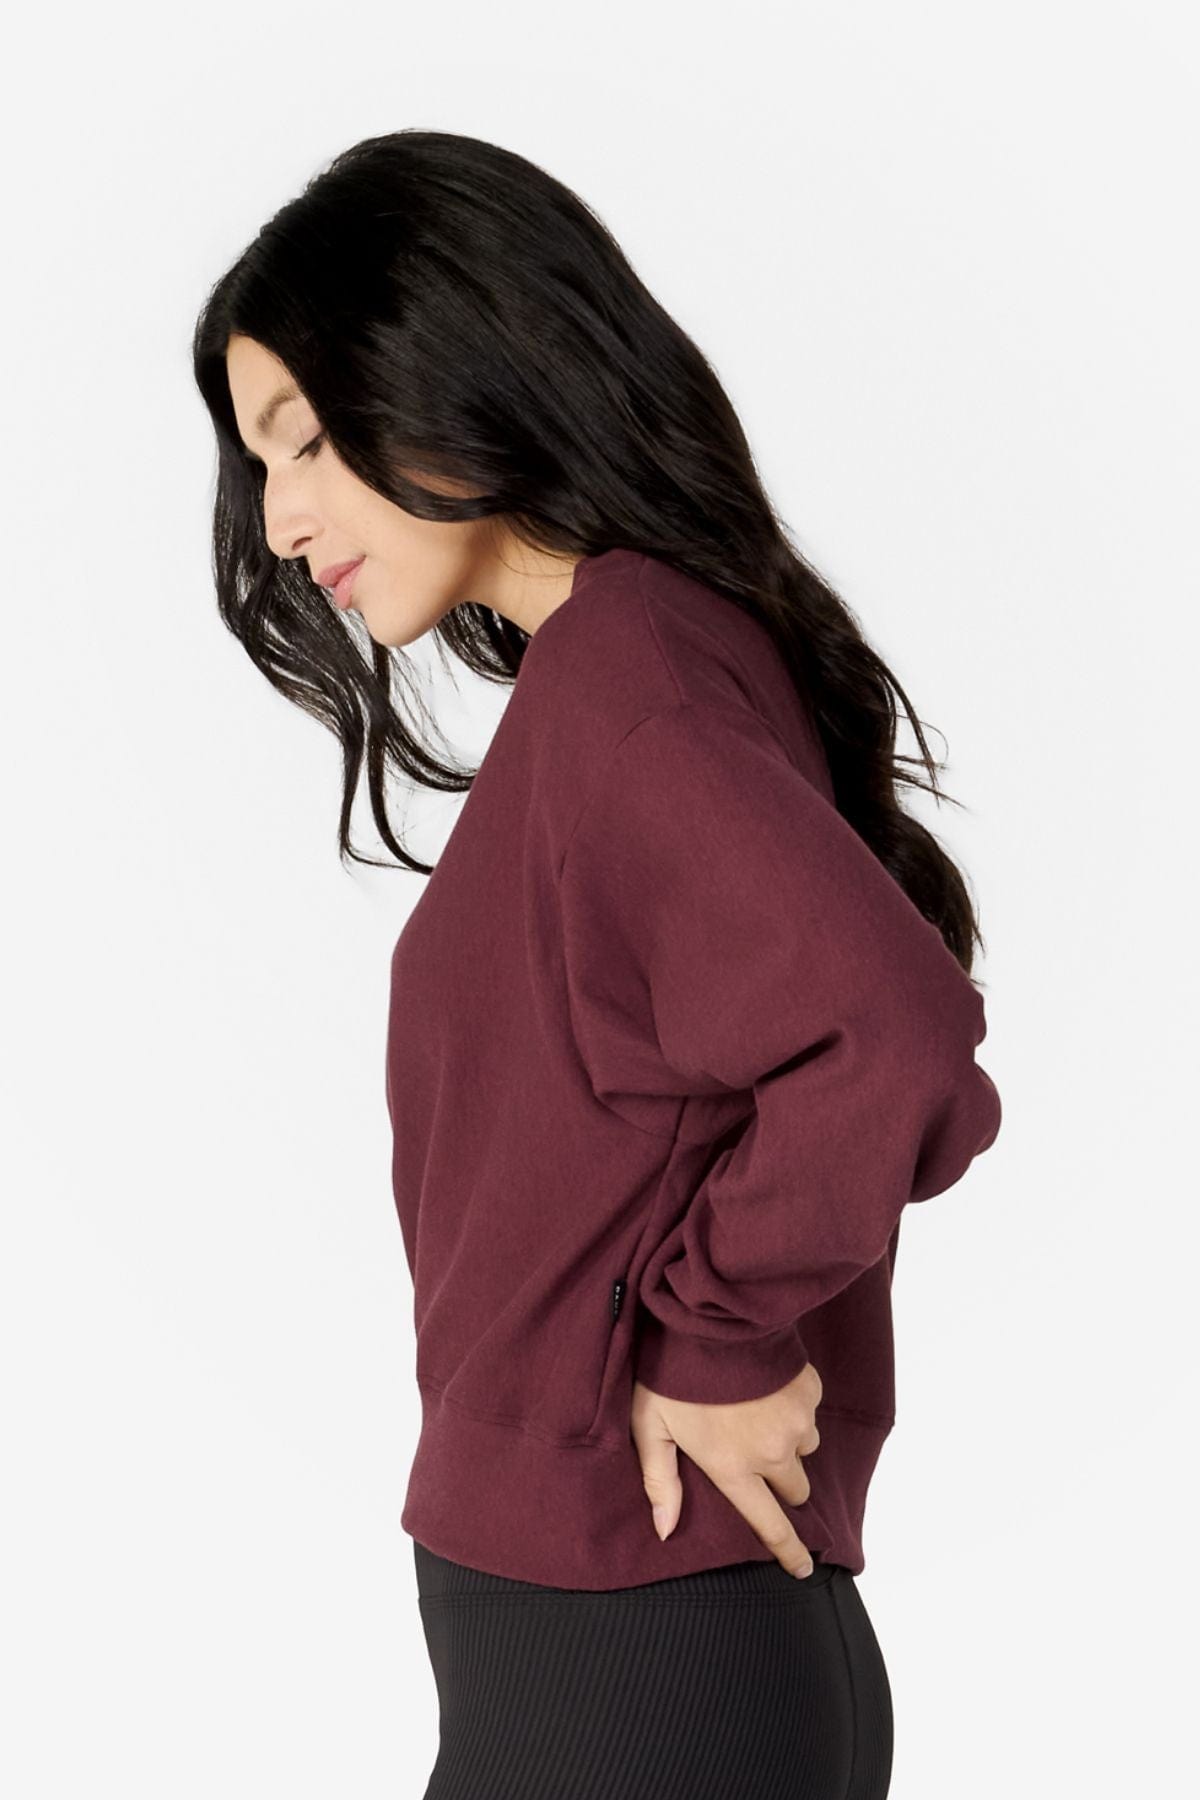 girl on her side wearing a dark red long sleeves sweater